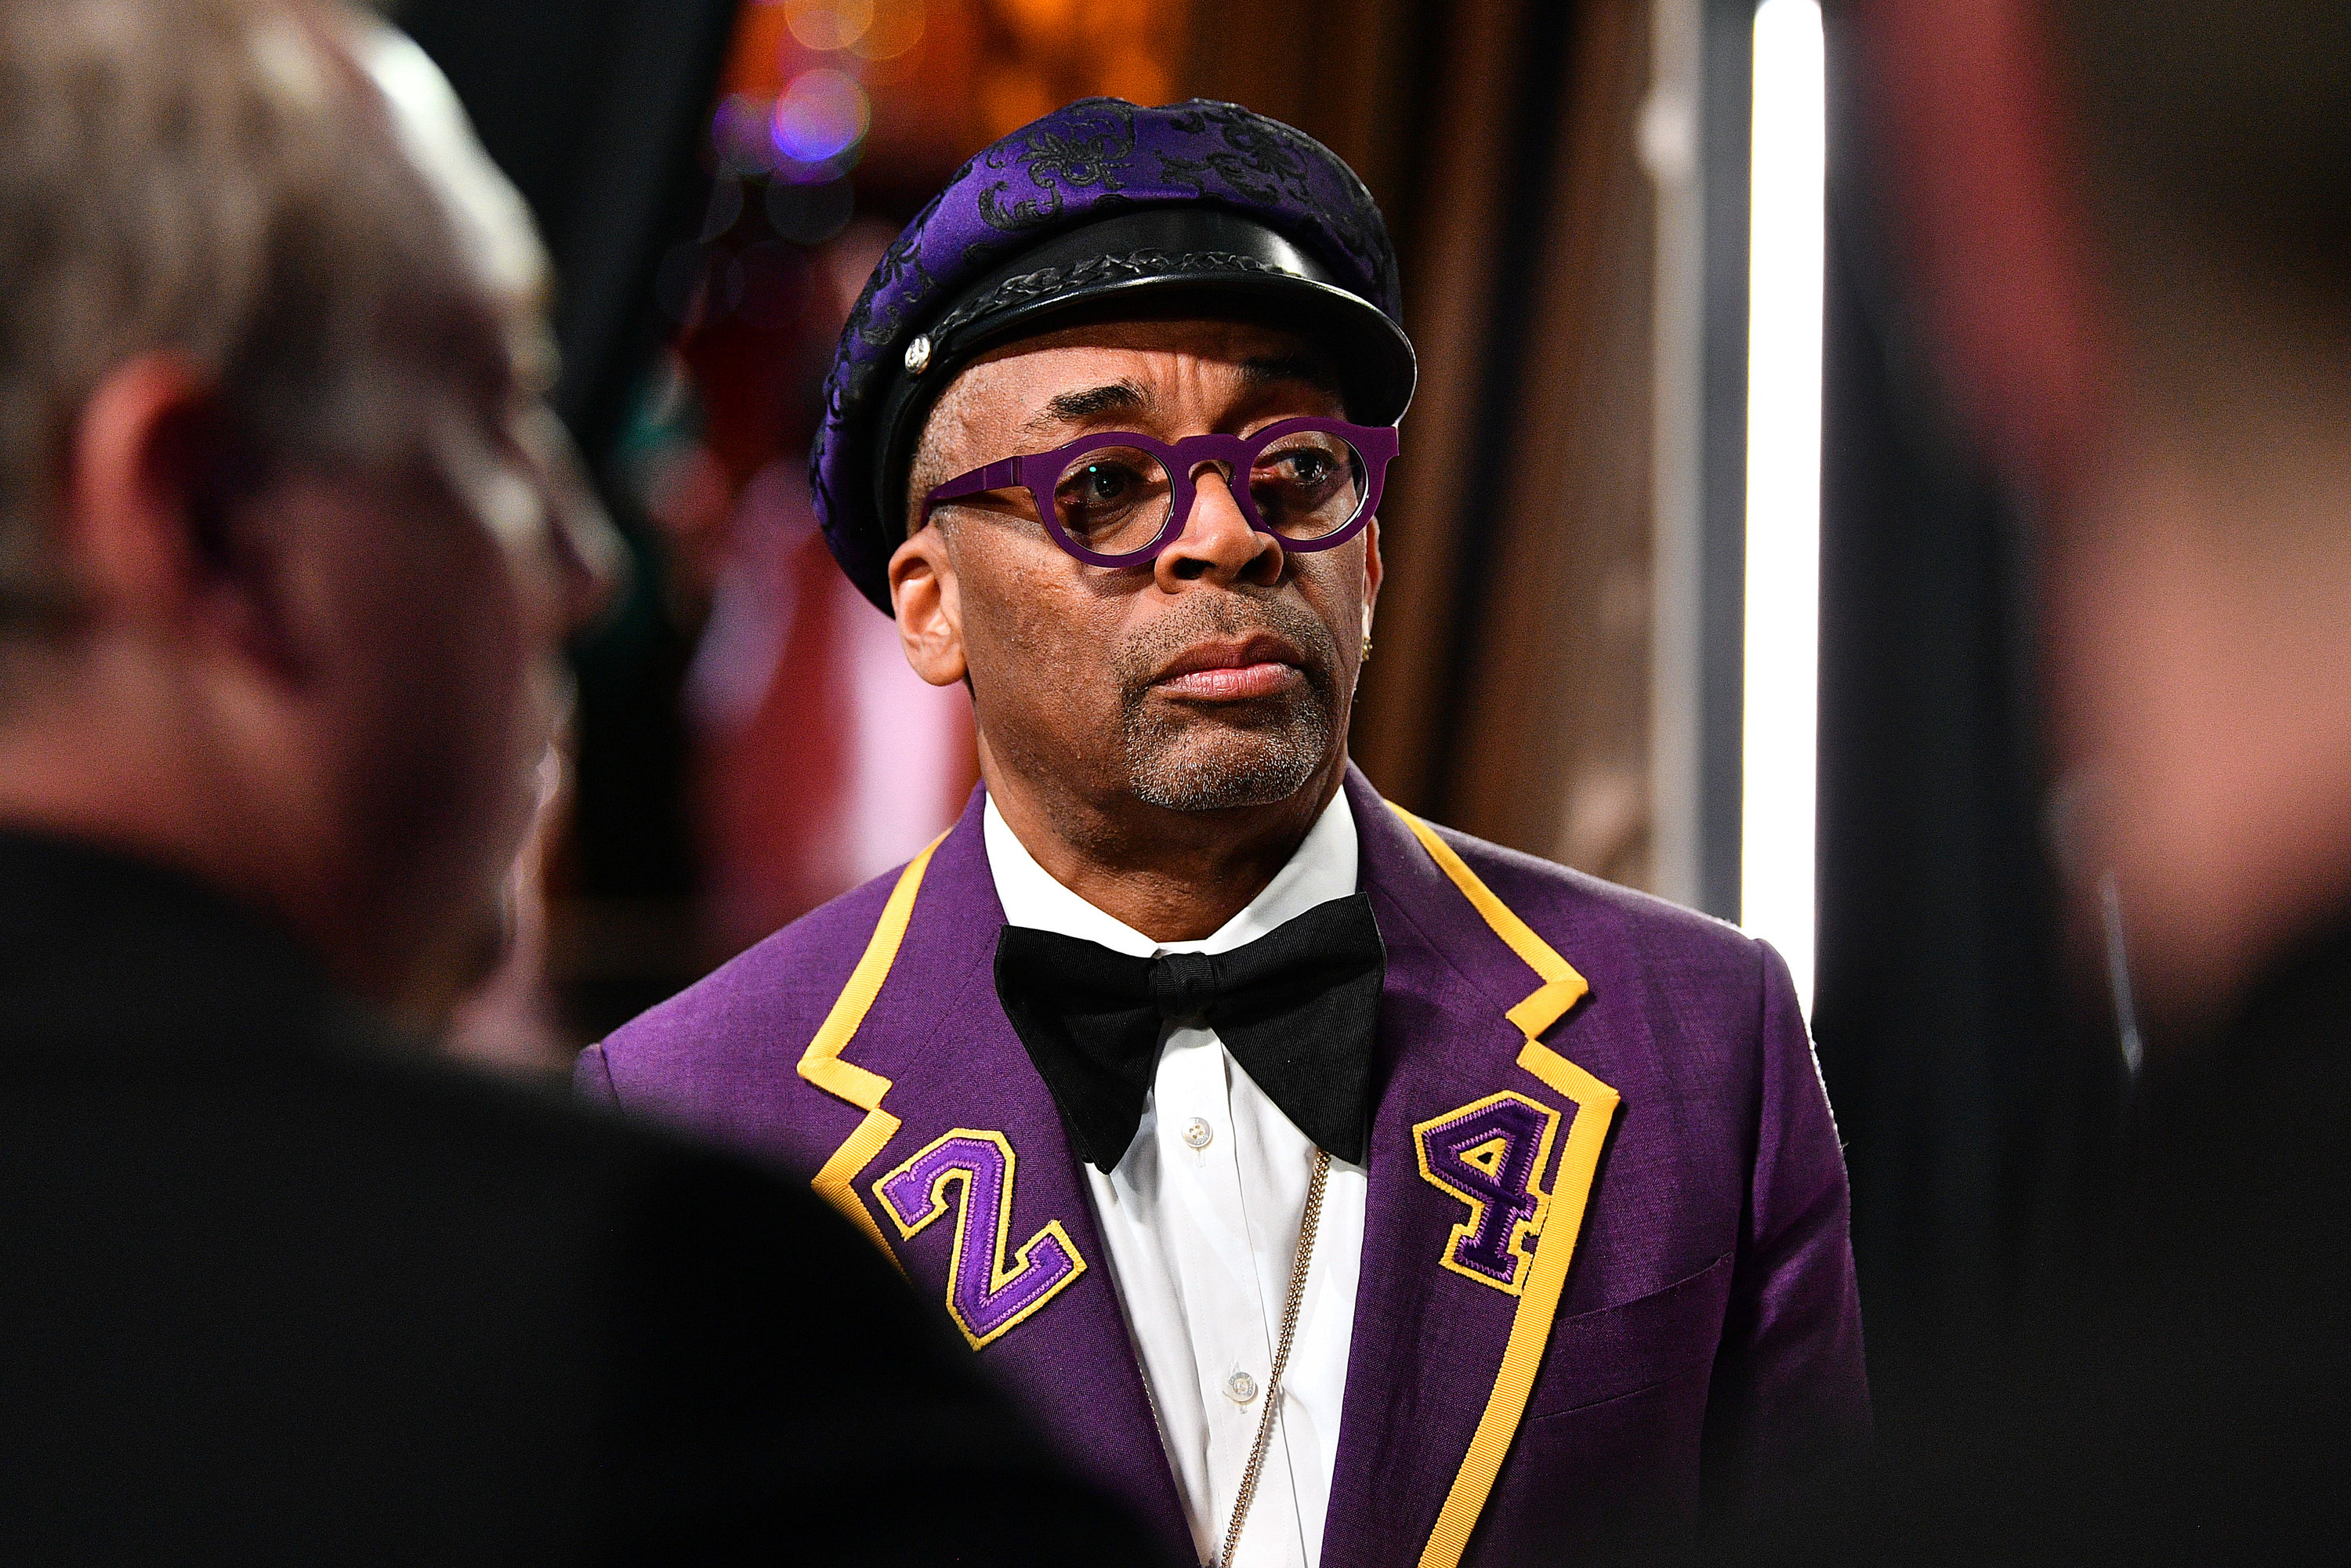 Spike Lee looking at something off camera